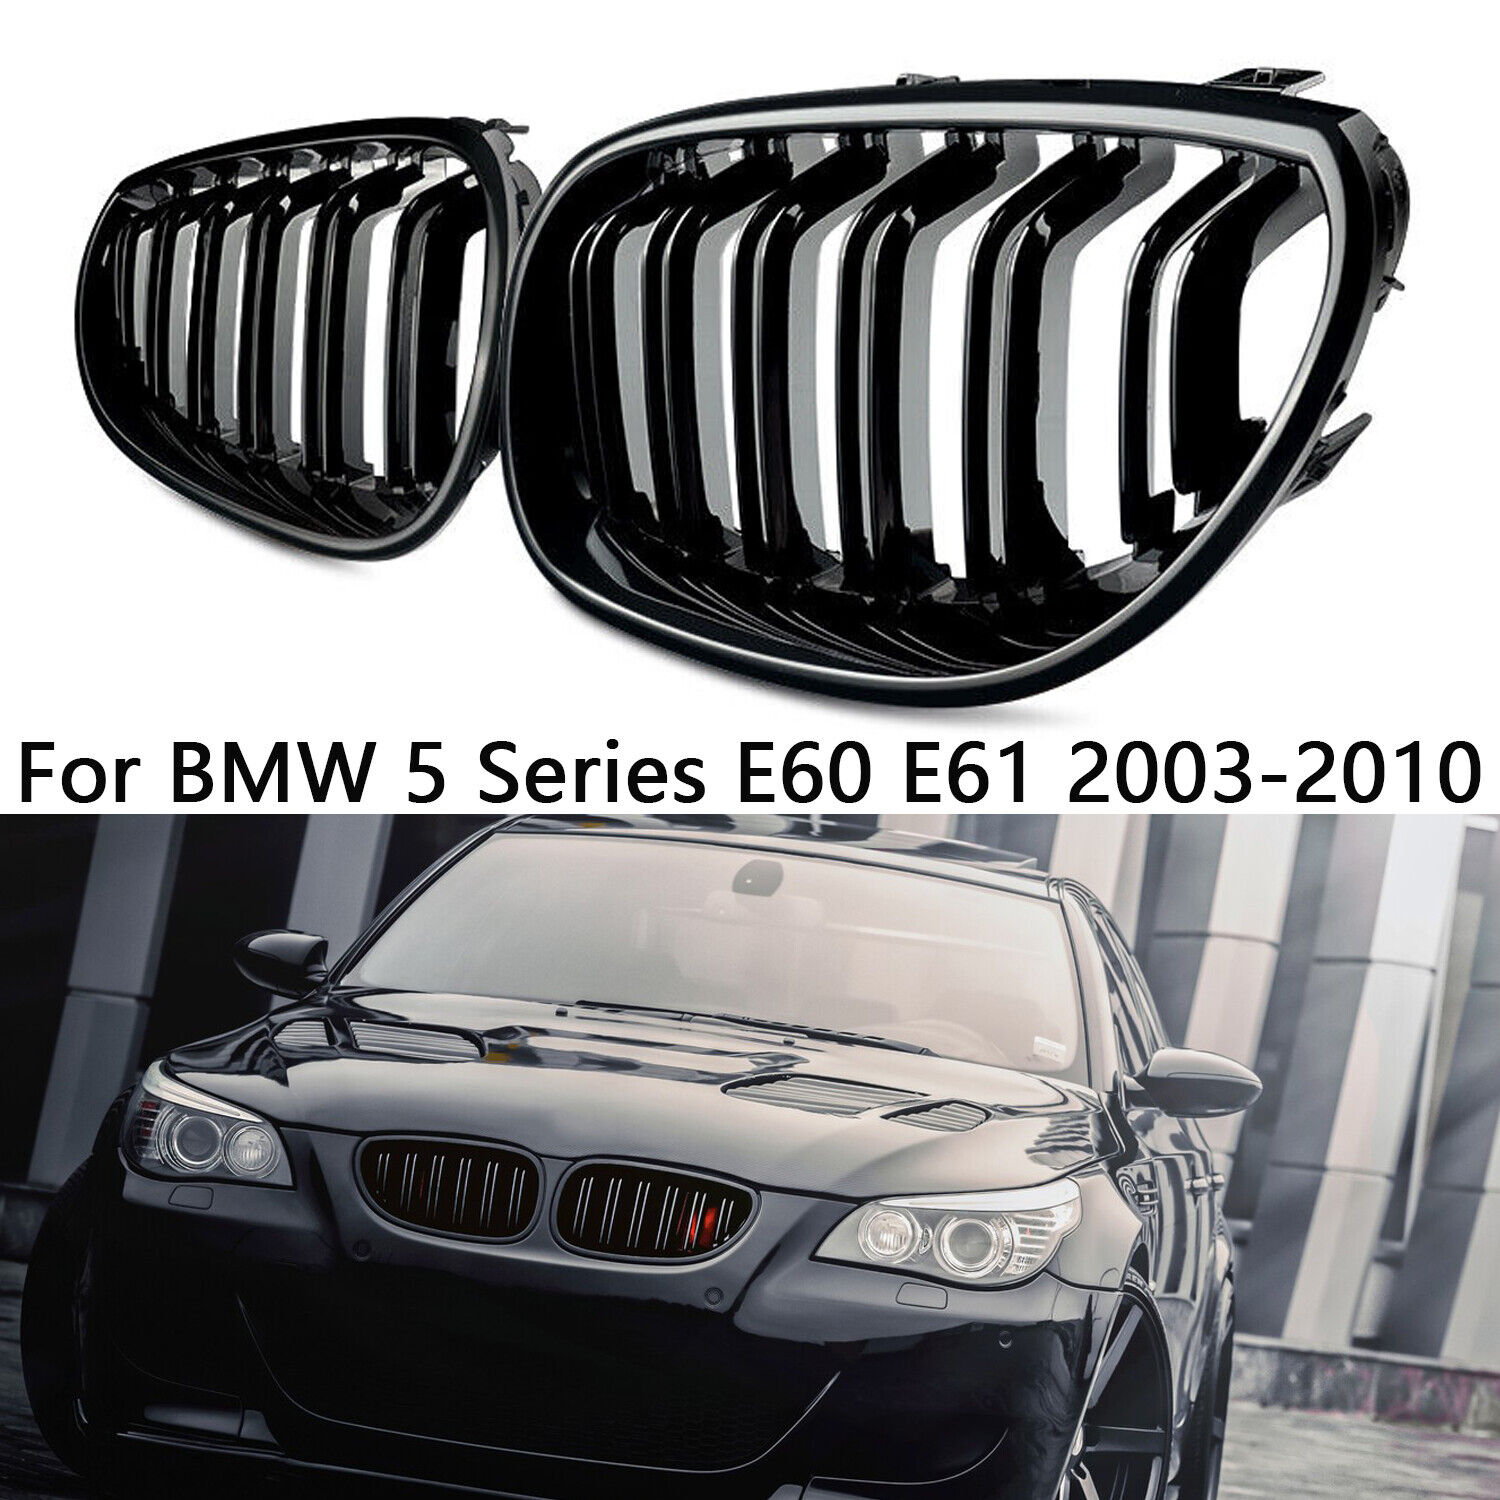 Front Grill For BMW E60 E61 M5 2003-2010 4DR Grille Gloss Black Dual Slats